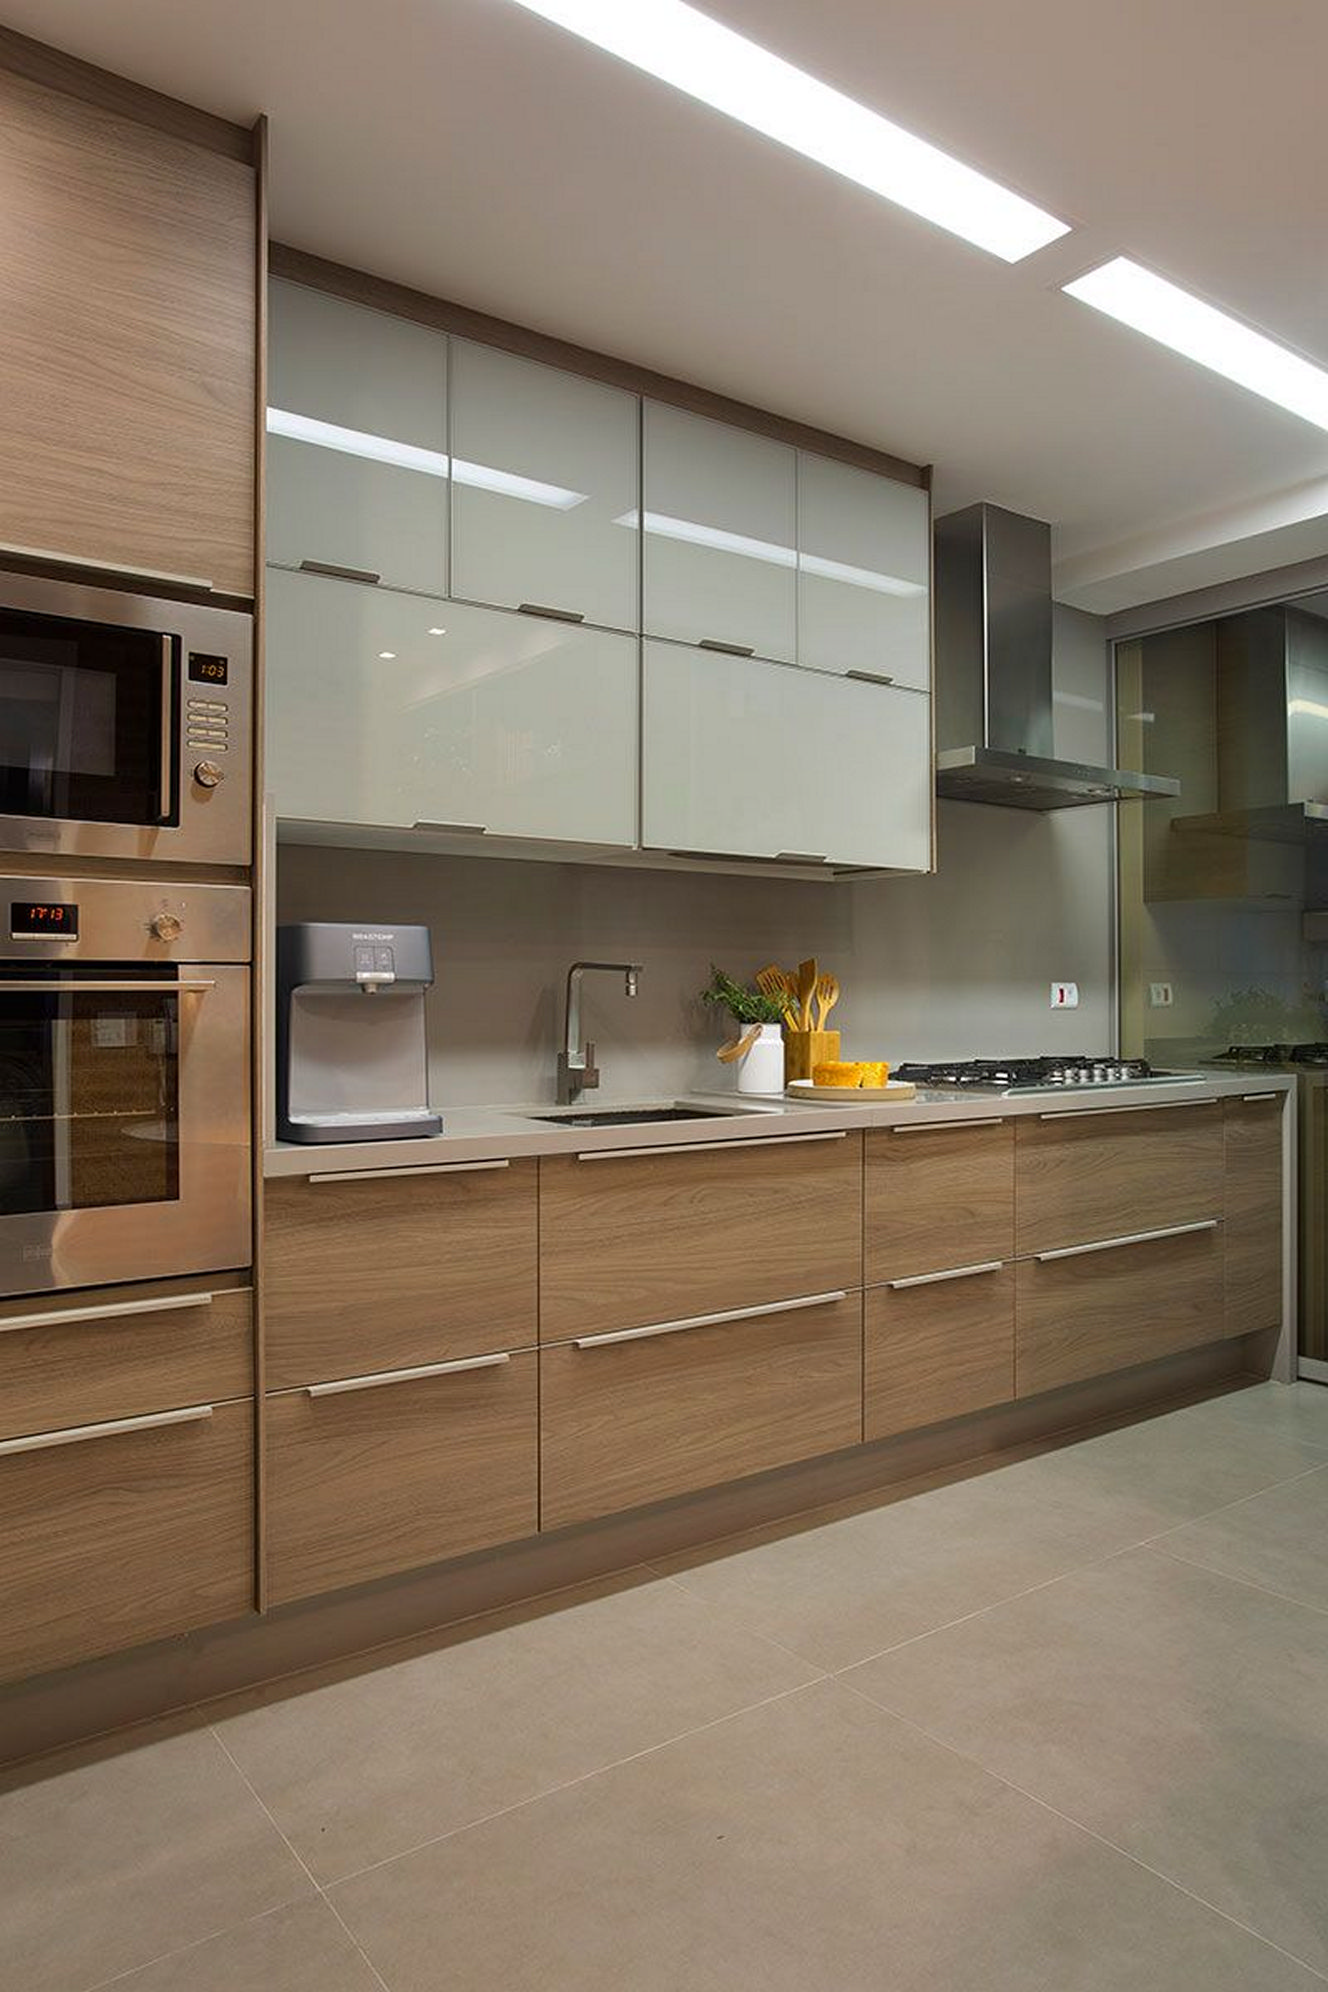 Smart, modern kitchen design, functionality and simplicity in one 1